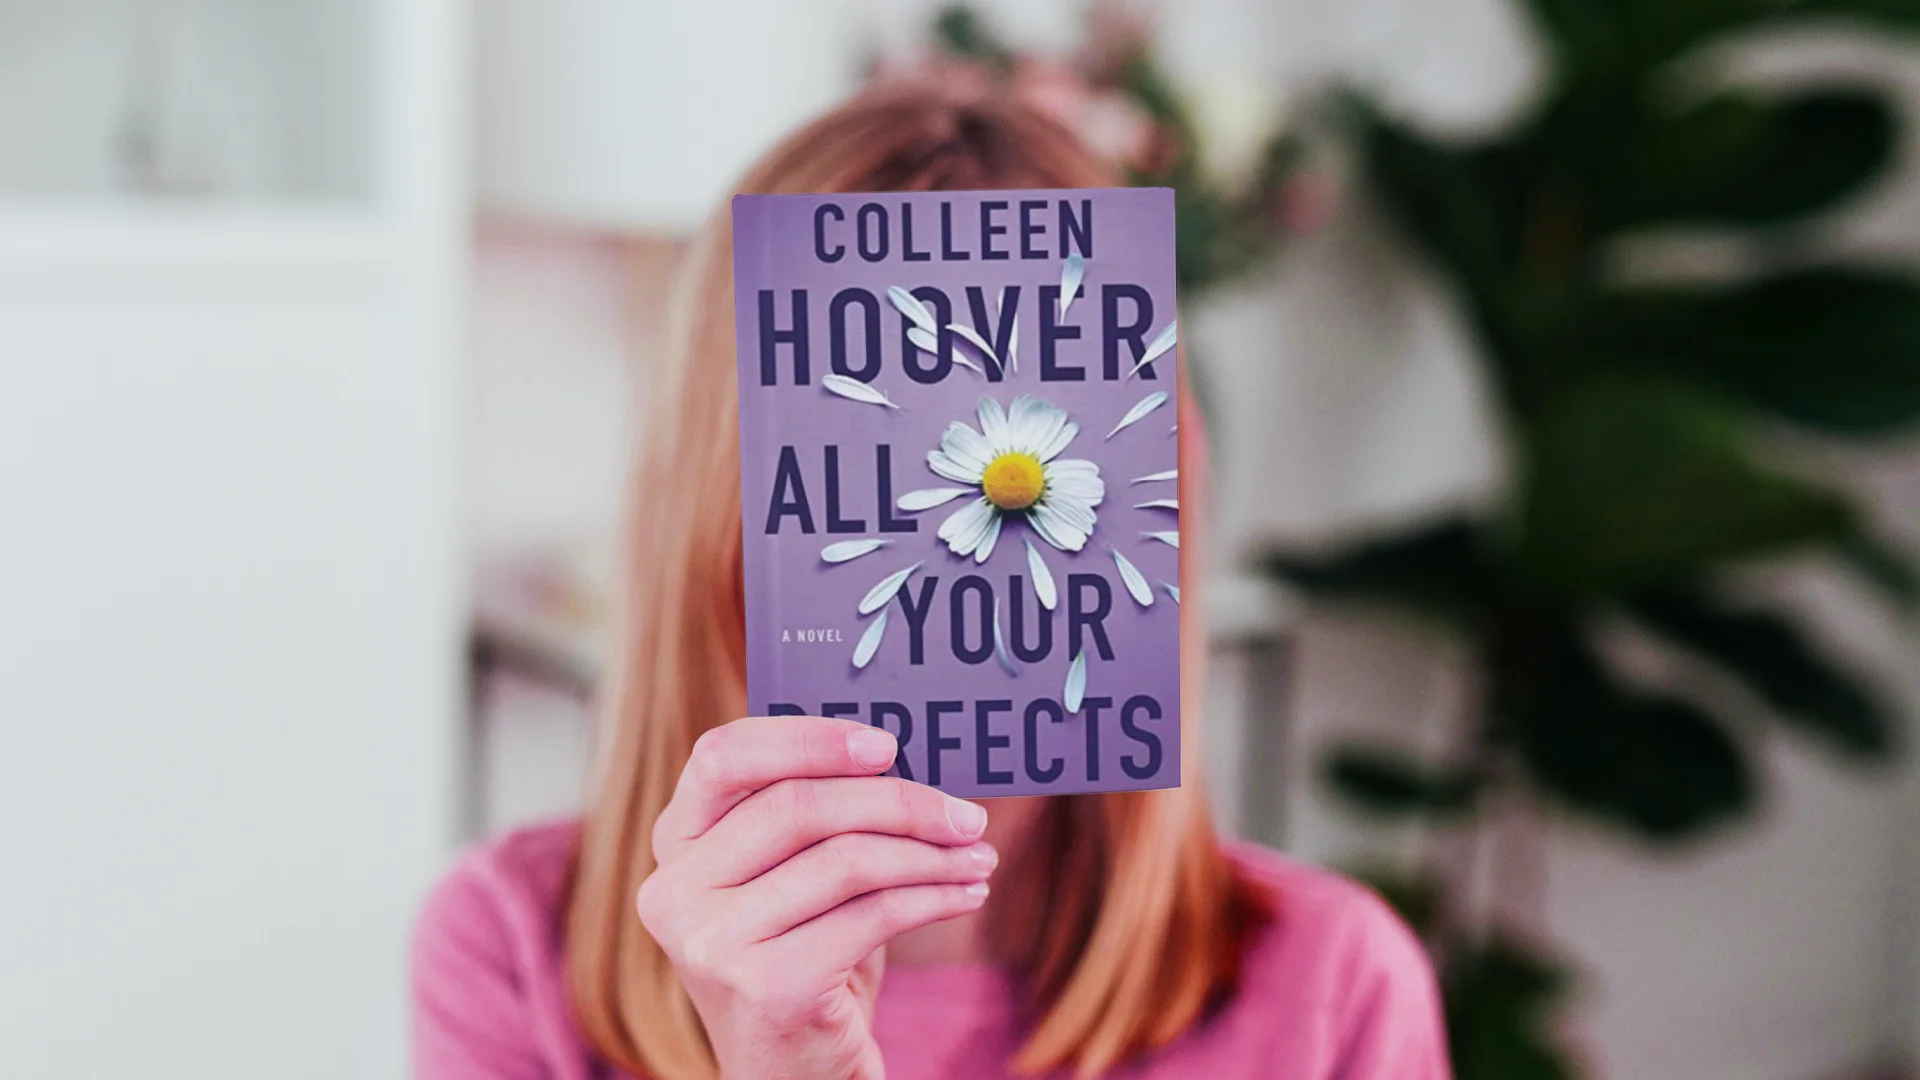 All Your Perfects Colleen Hoover